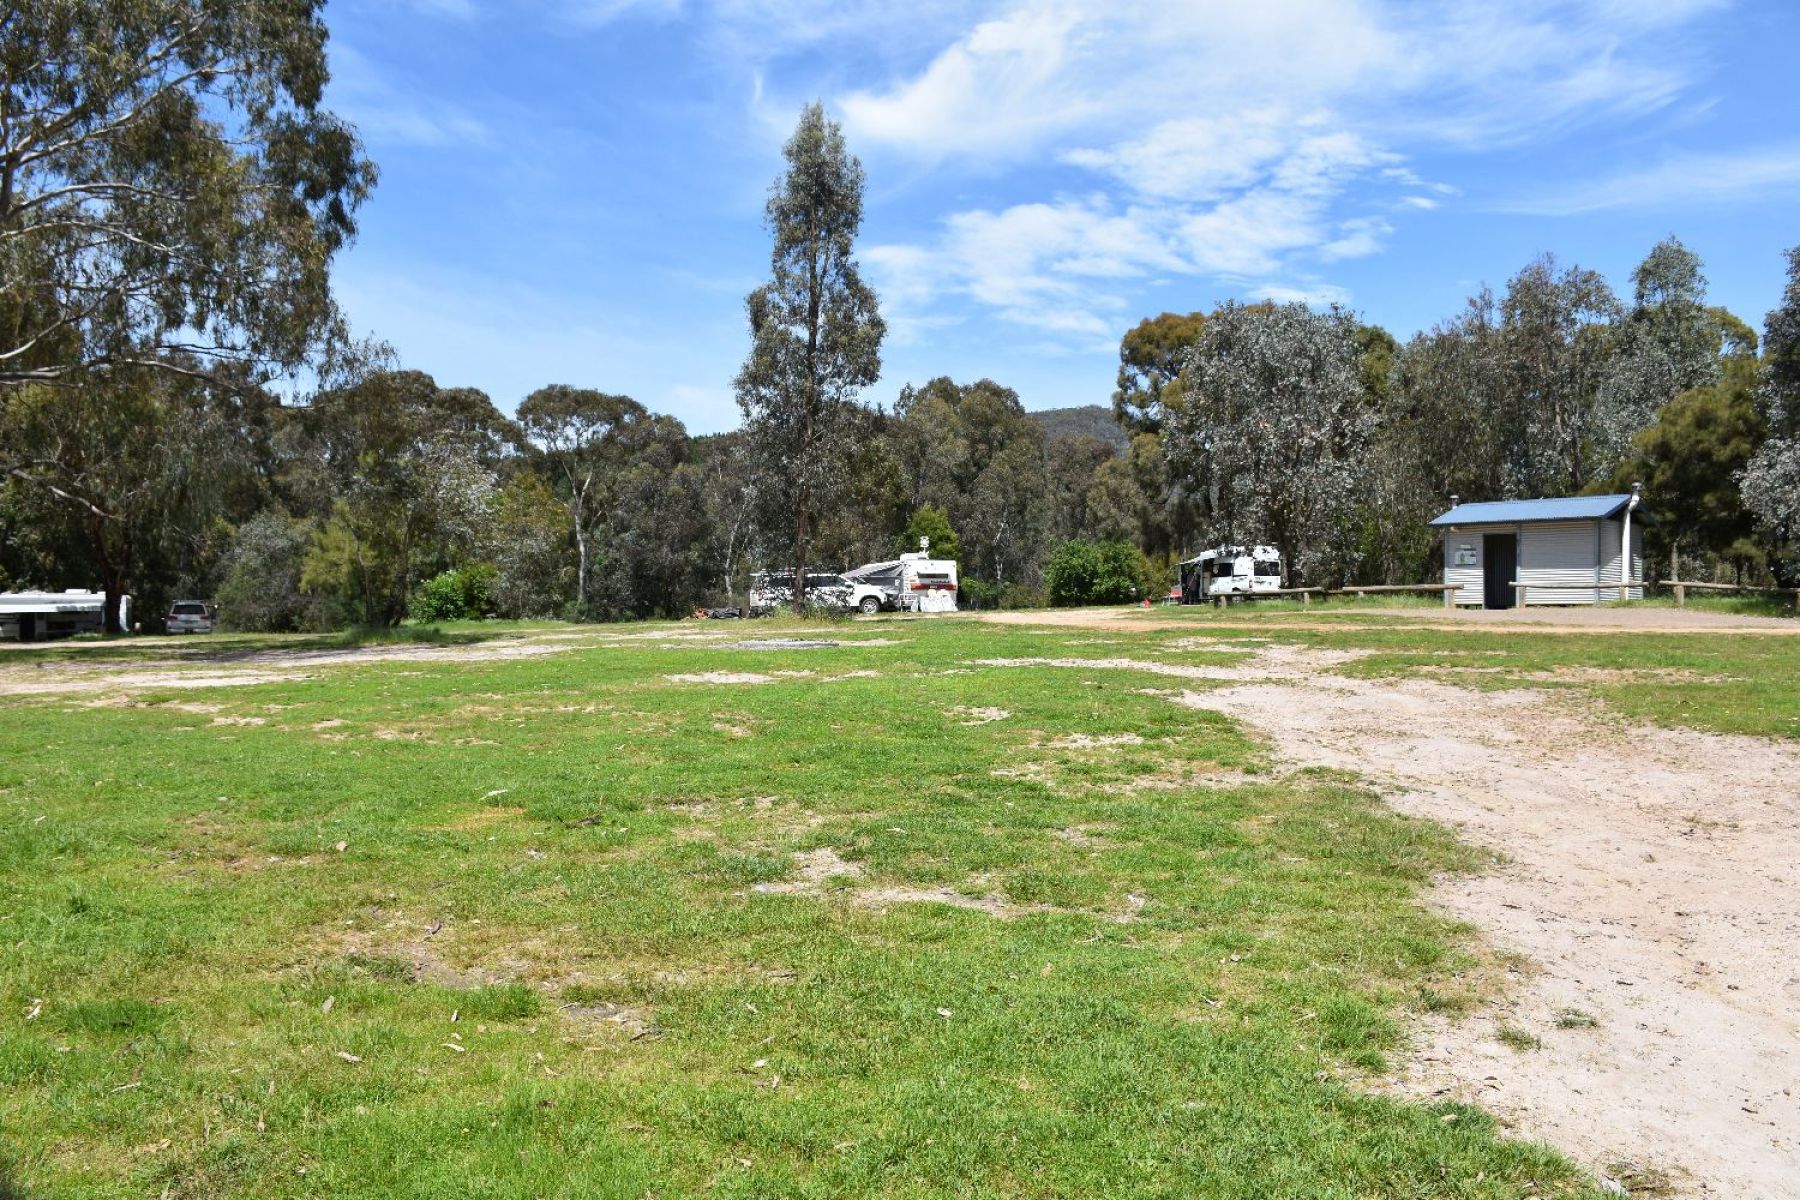 Two caravans set up at camp sites and an amenity block located nearby